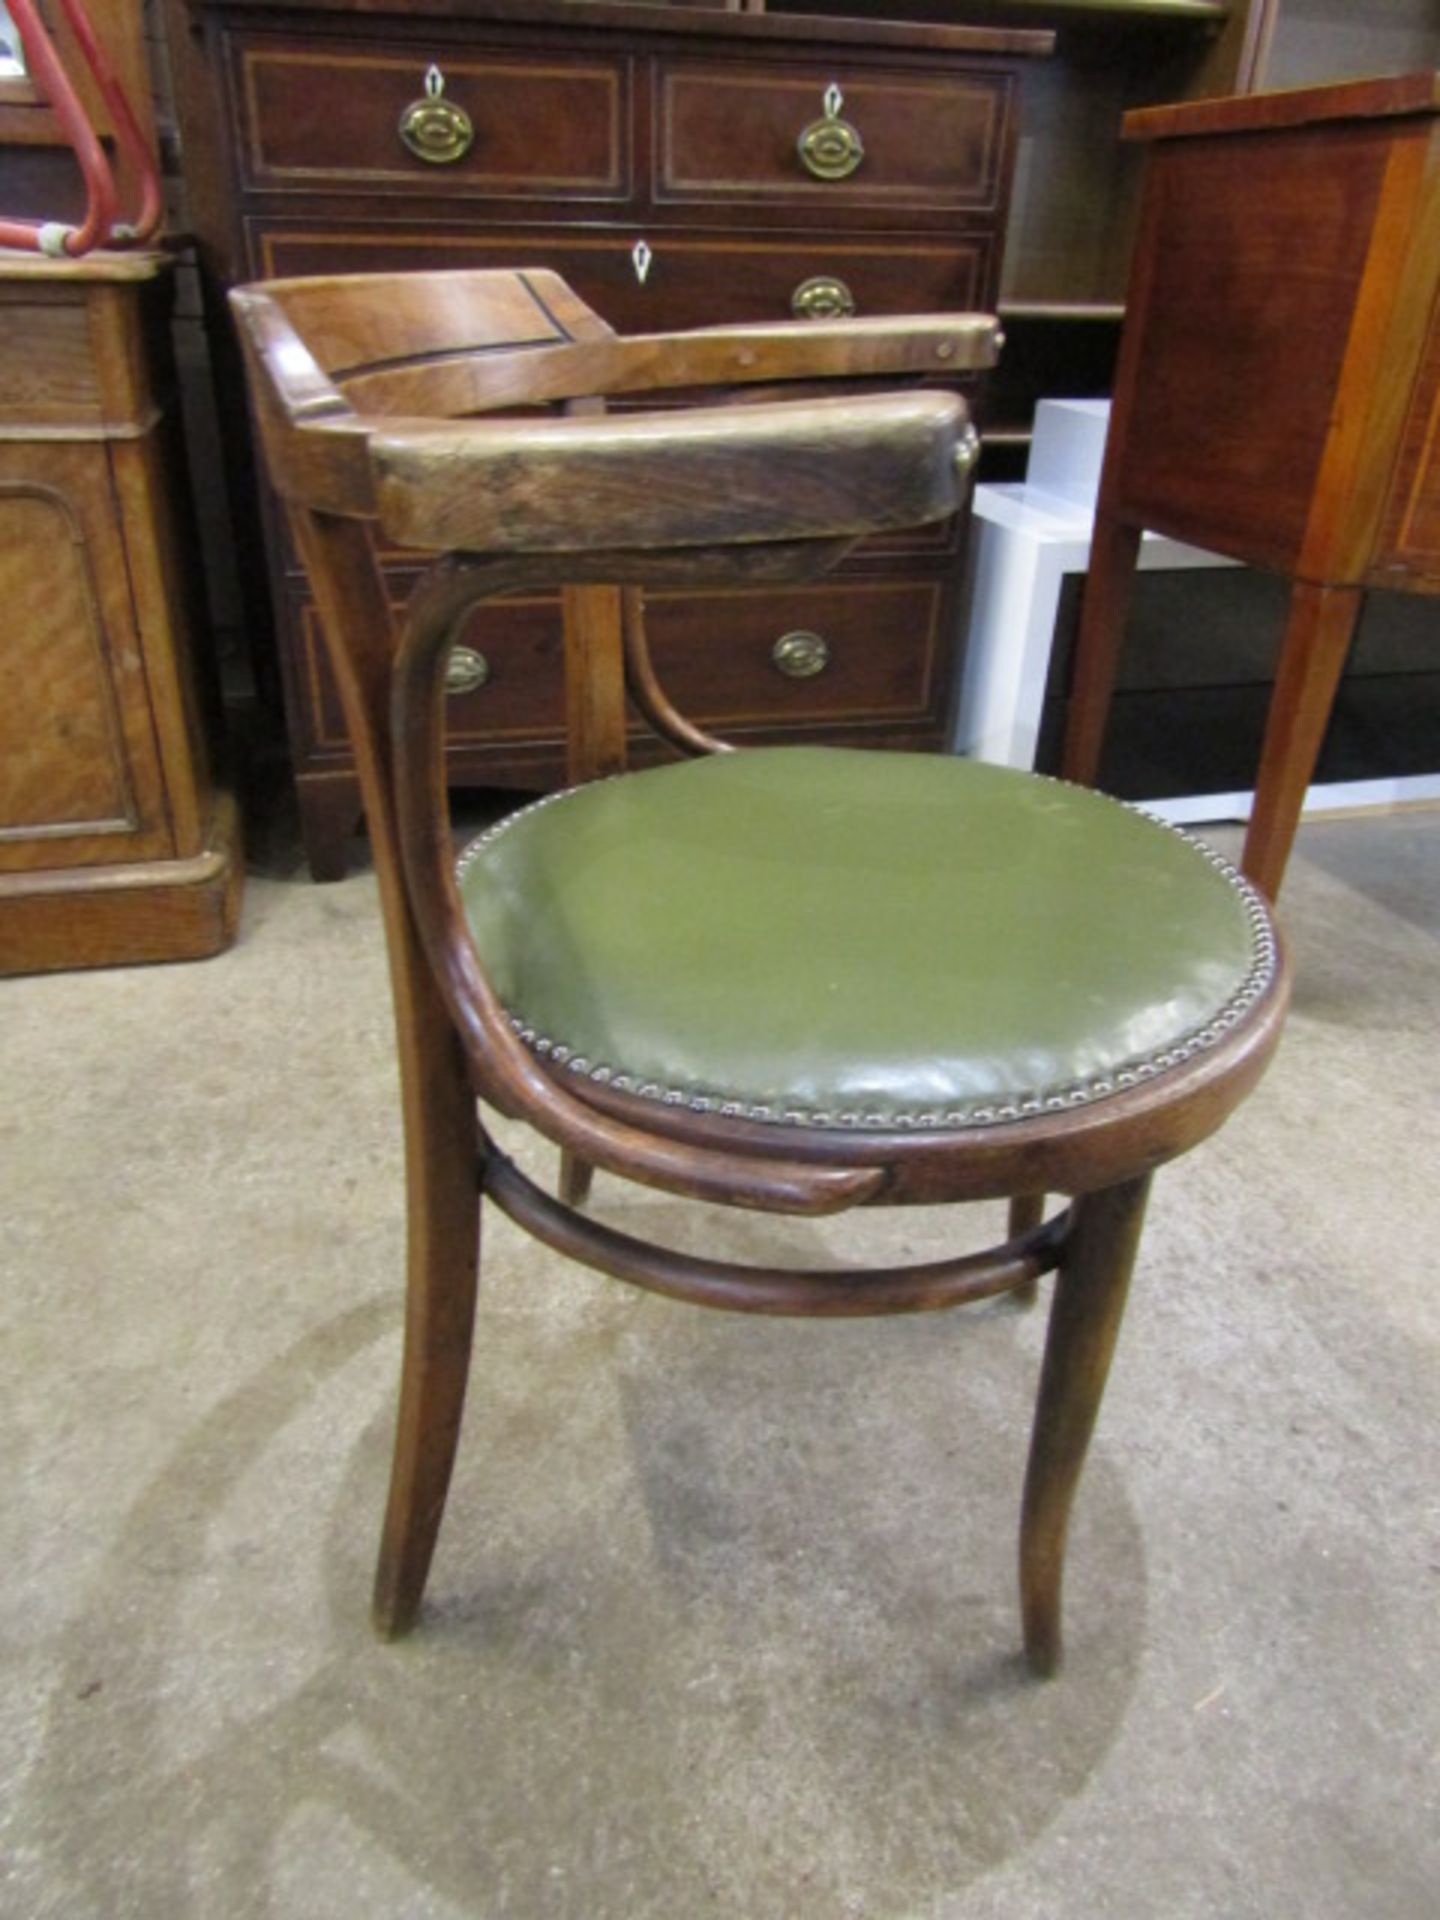 A bentwood penny seat chair with leather upholstered seat - Image 2 of 4